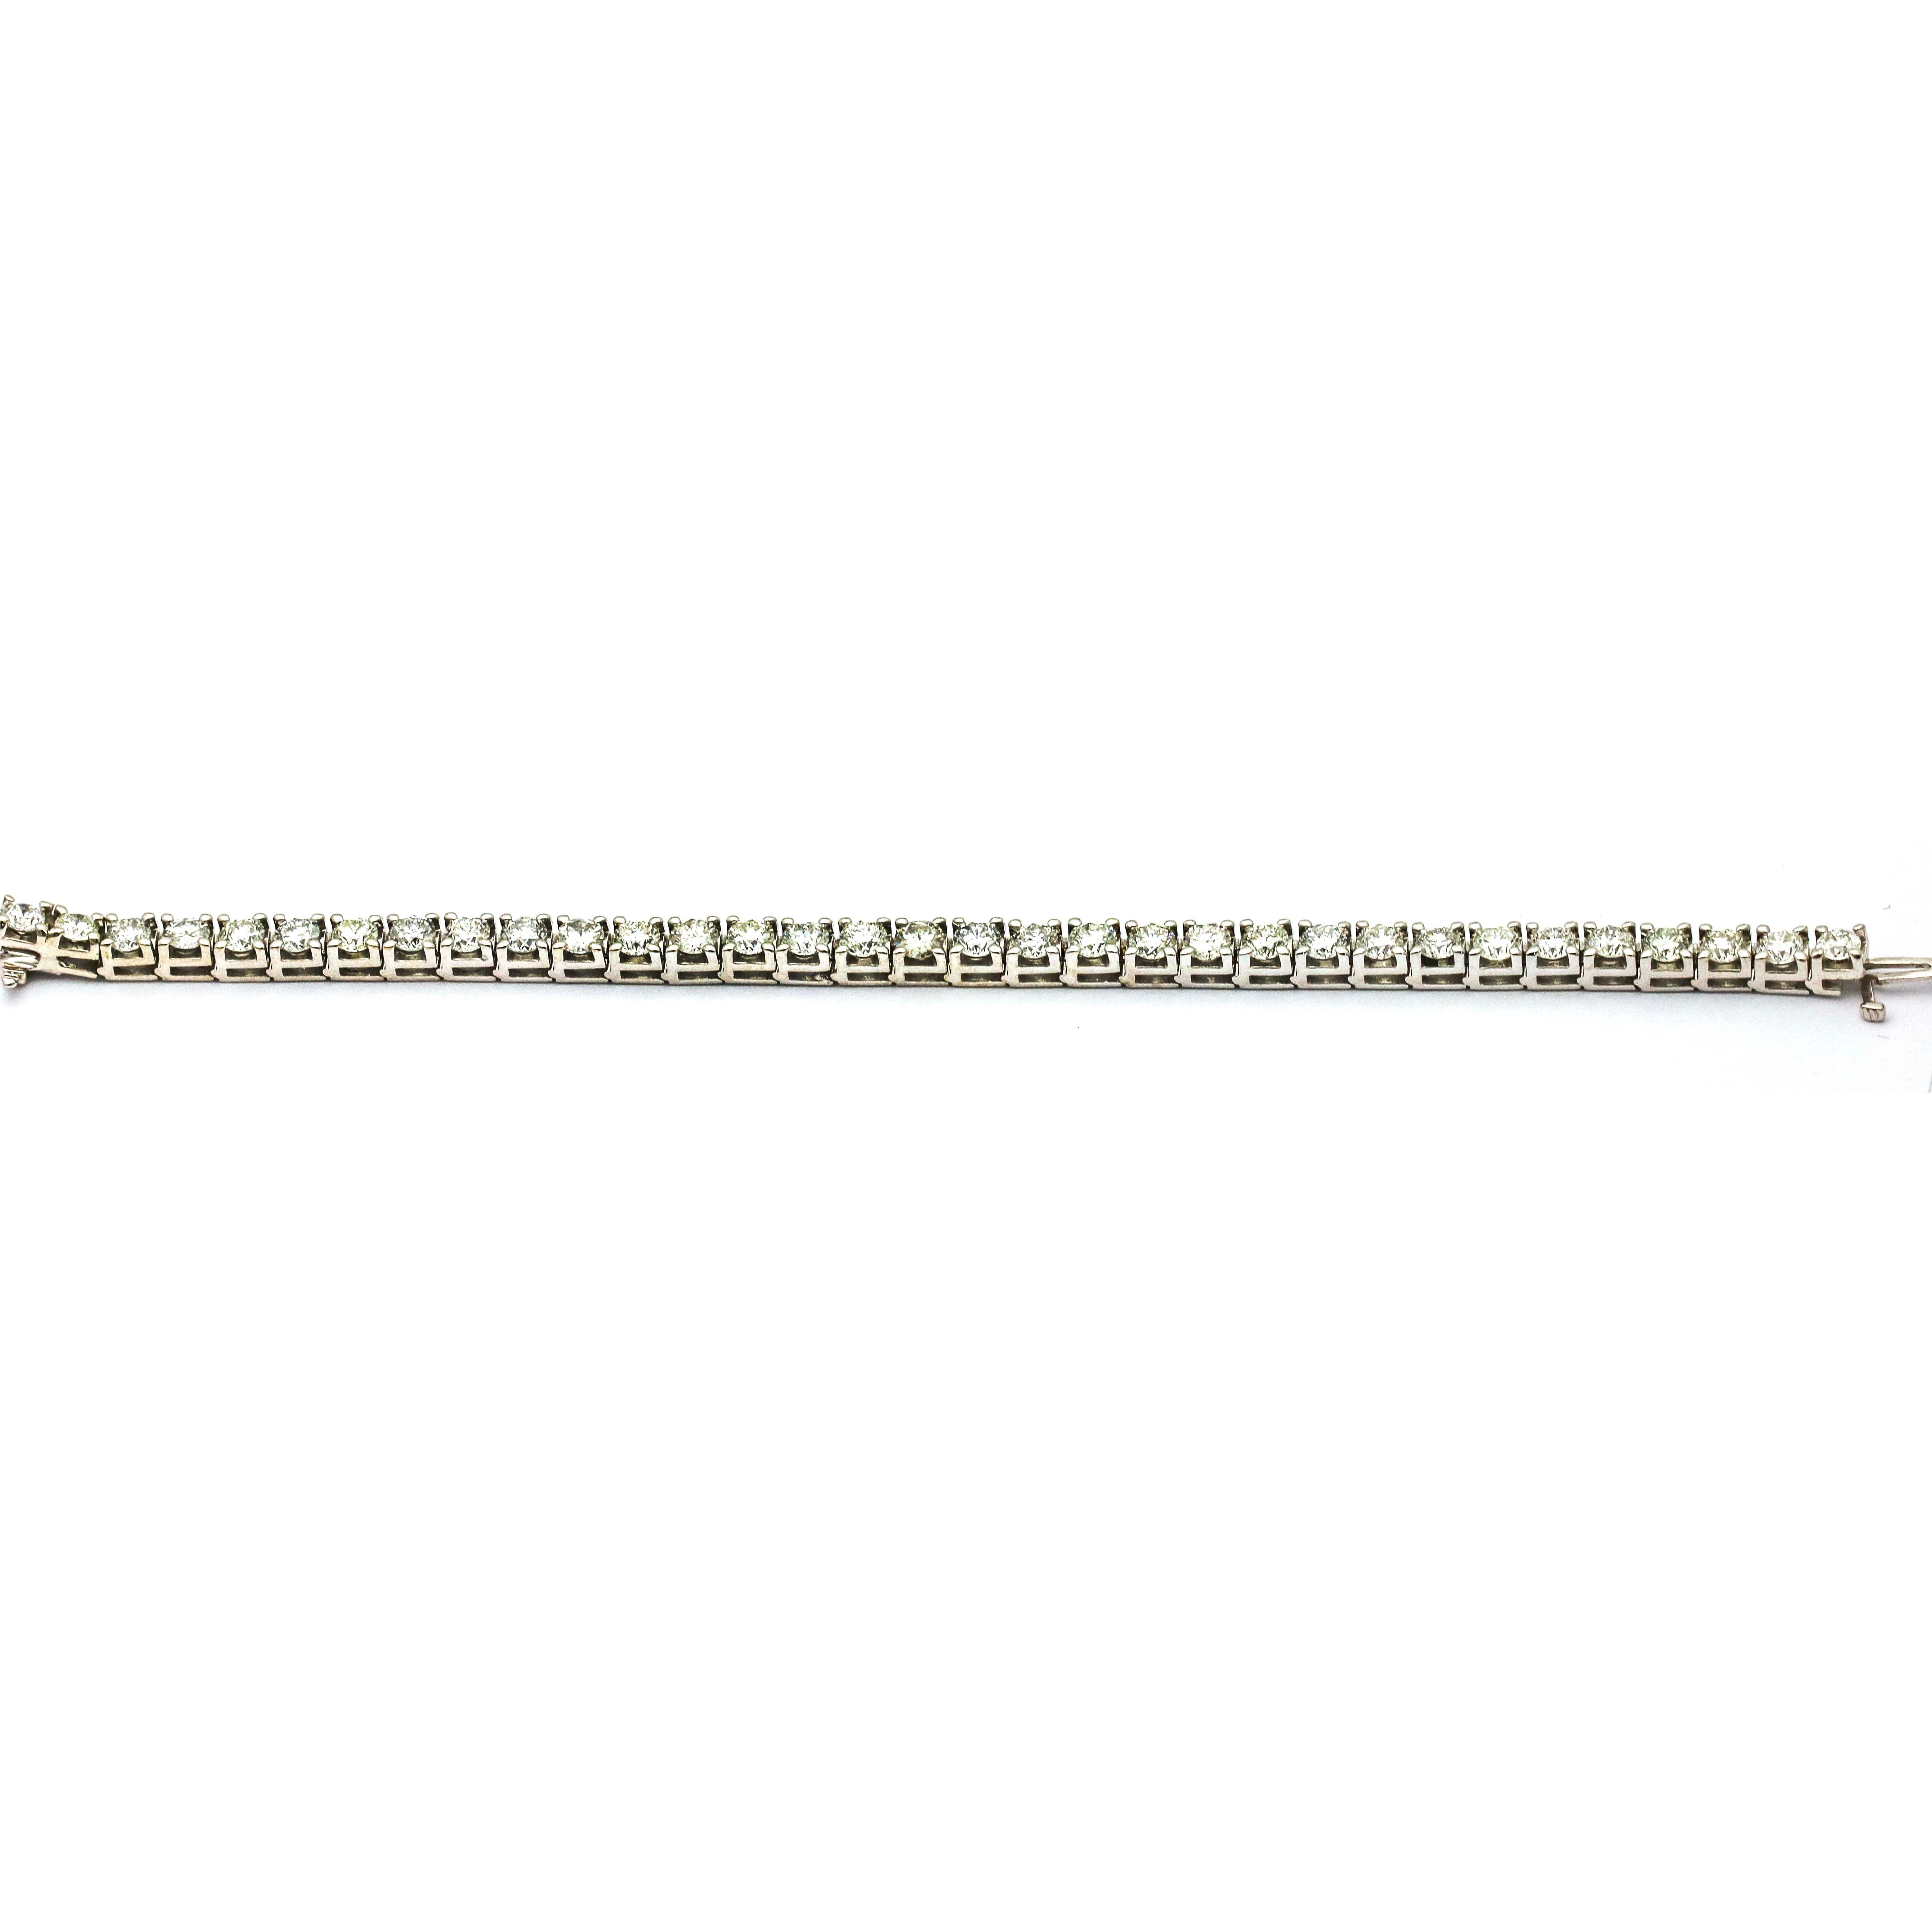 Classic diamond tennis bracelet crafted in 18k white gold. Size medium, fits a wrist up to 6 inches. The bracelet is prong set with 33 round-cut natural diamonds. Each diamond weights .25 carat. Diamond total carat weight, 8.25 carats. H-I Color.